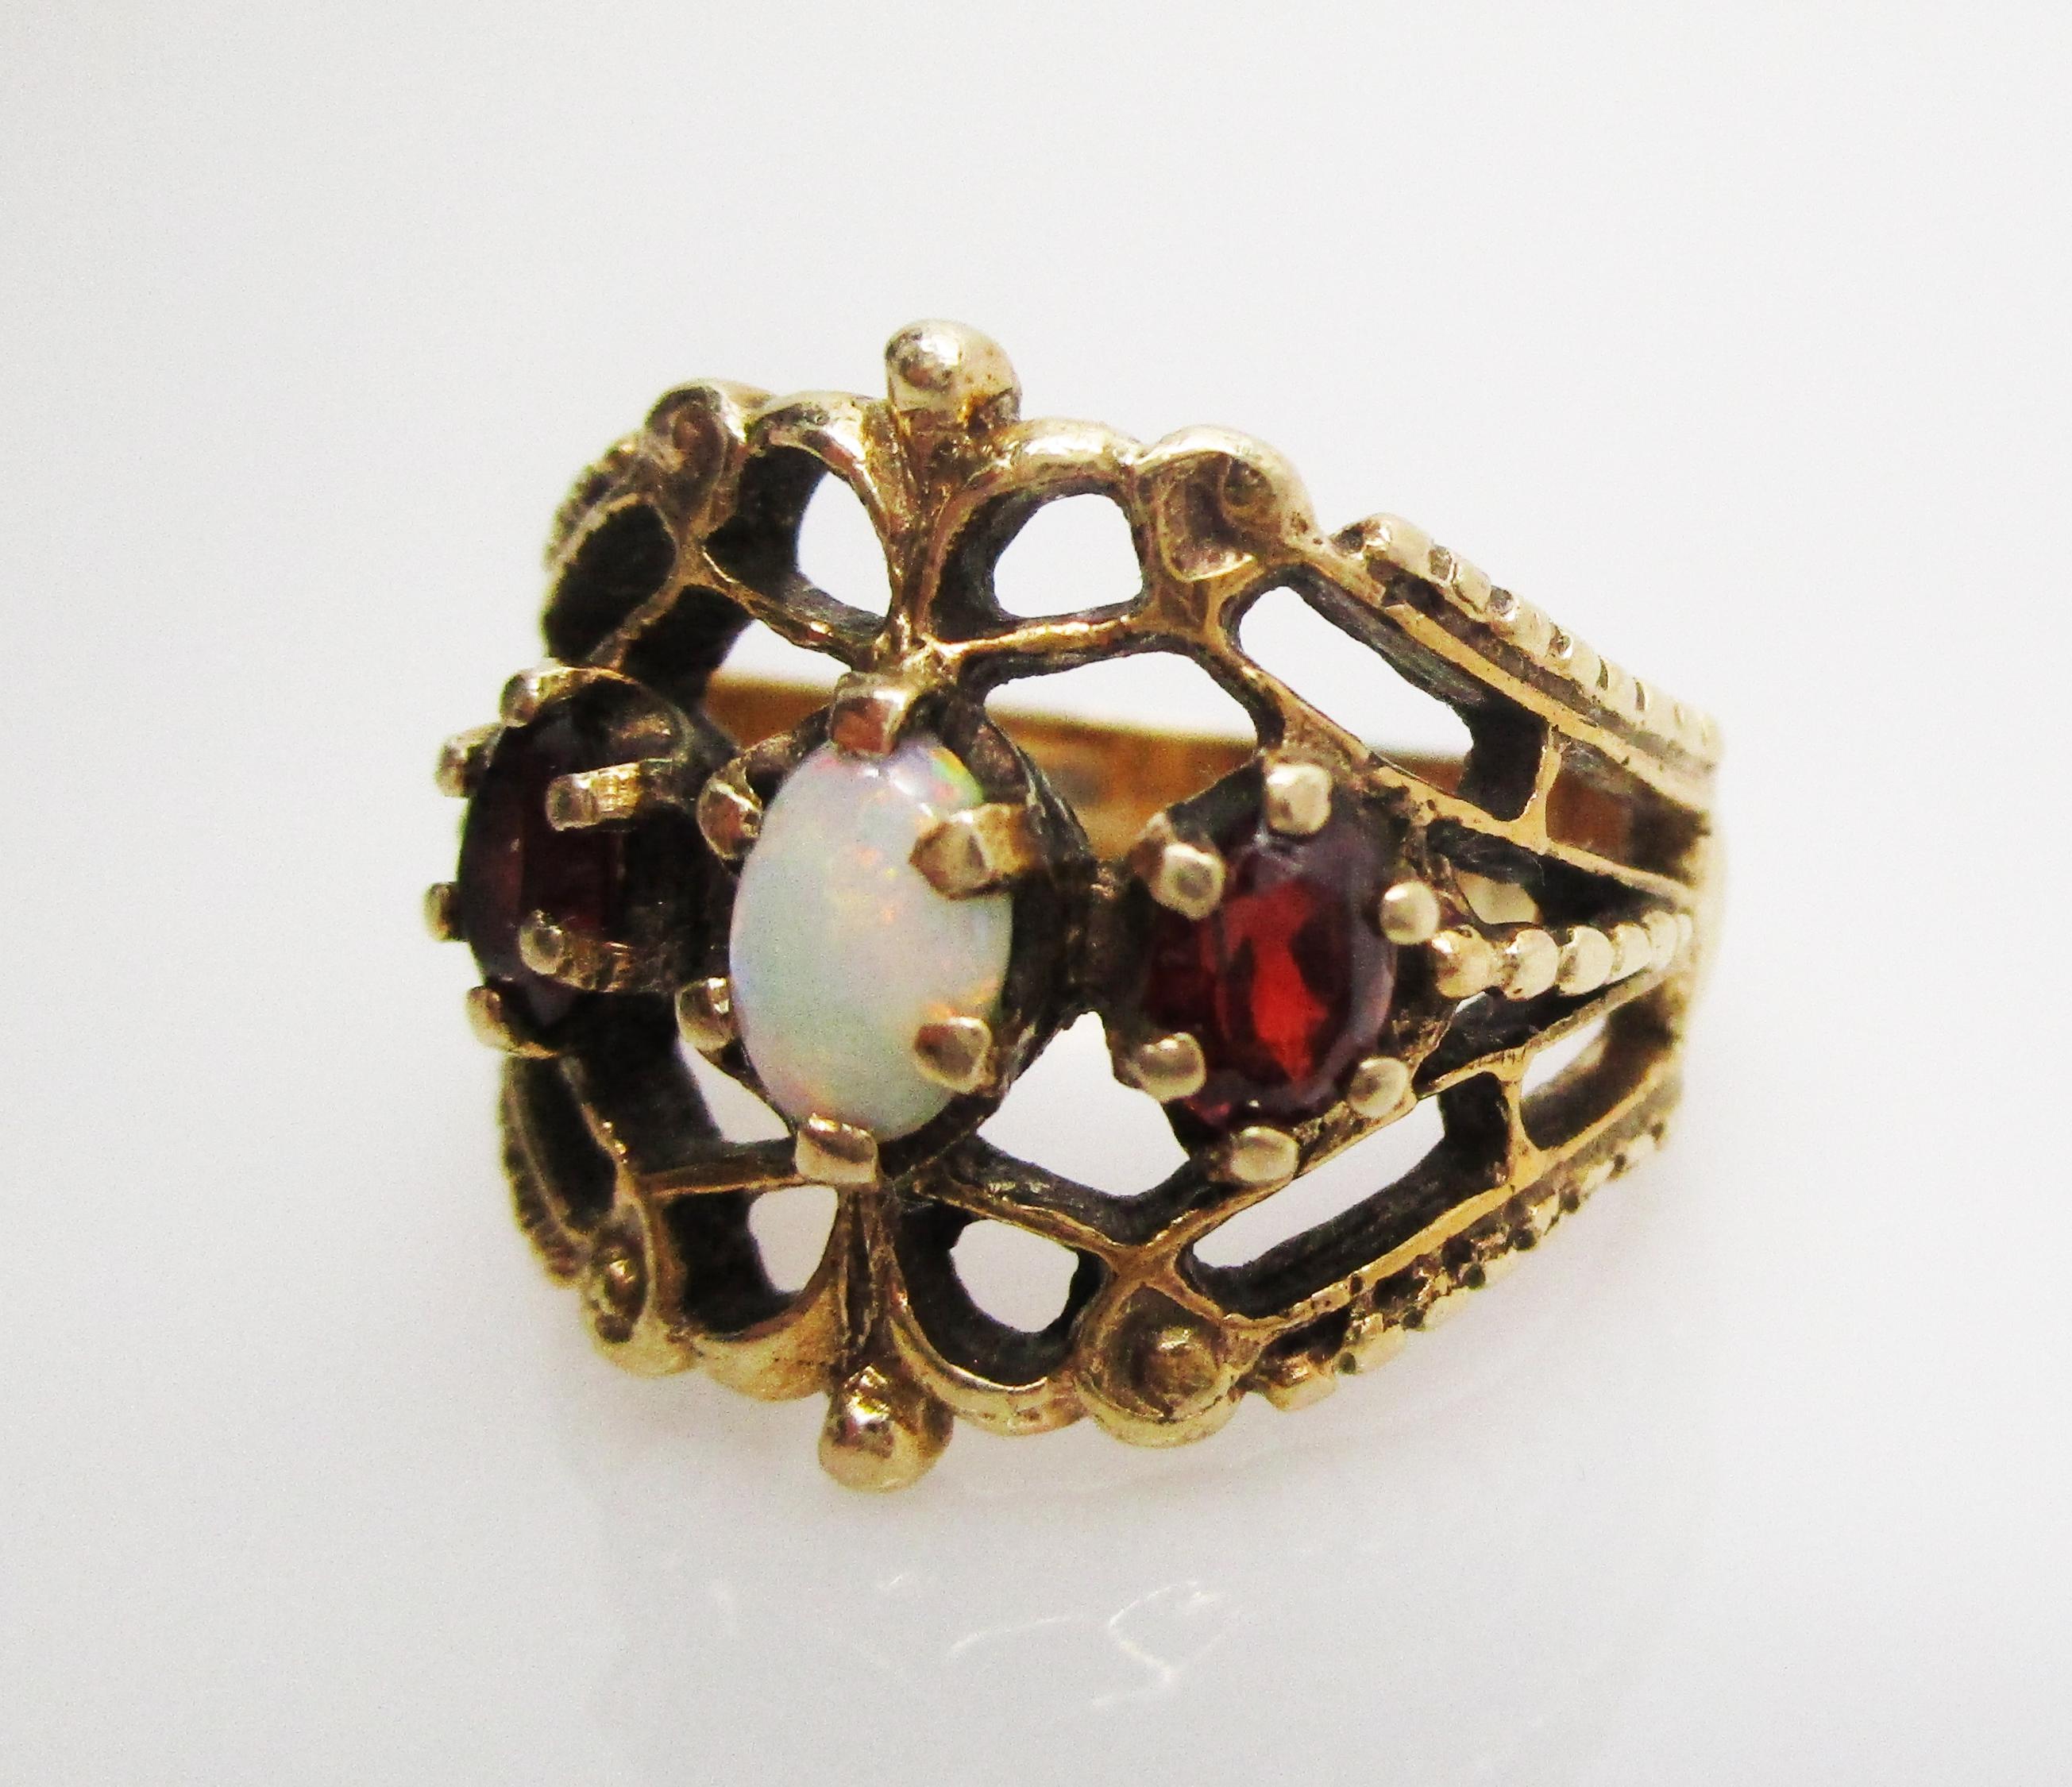 This is a fantastic 14k yellow gold ring featuring a stunning fiery white opal center stone flanked by two beautiful garnet side stones. The filigree design of the ring creates a unique silhouette that is reminiscent of a royal crown. The negative